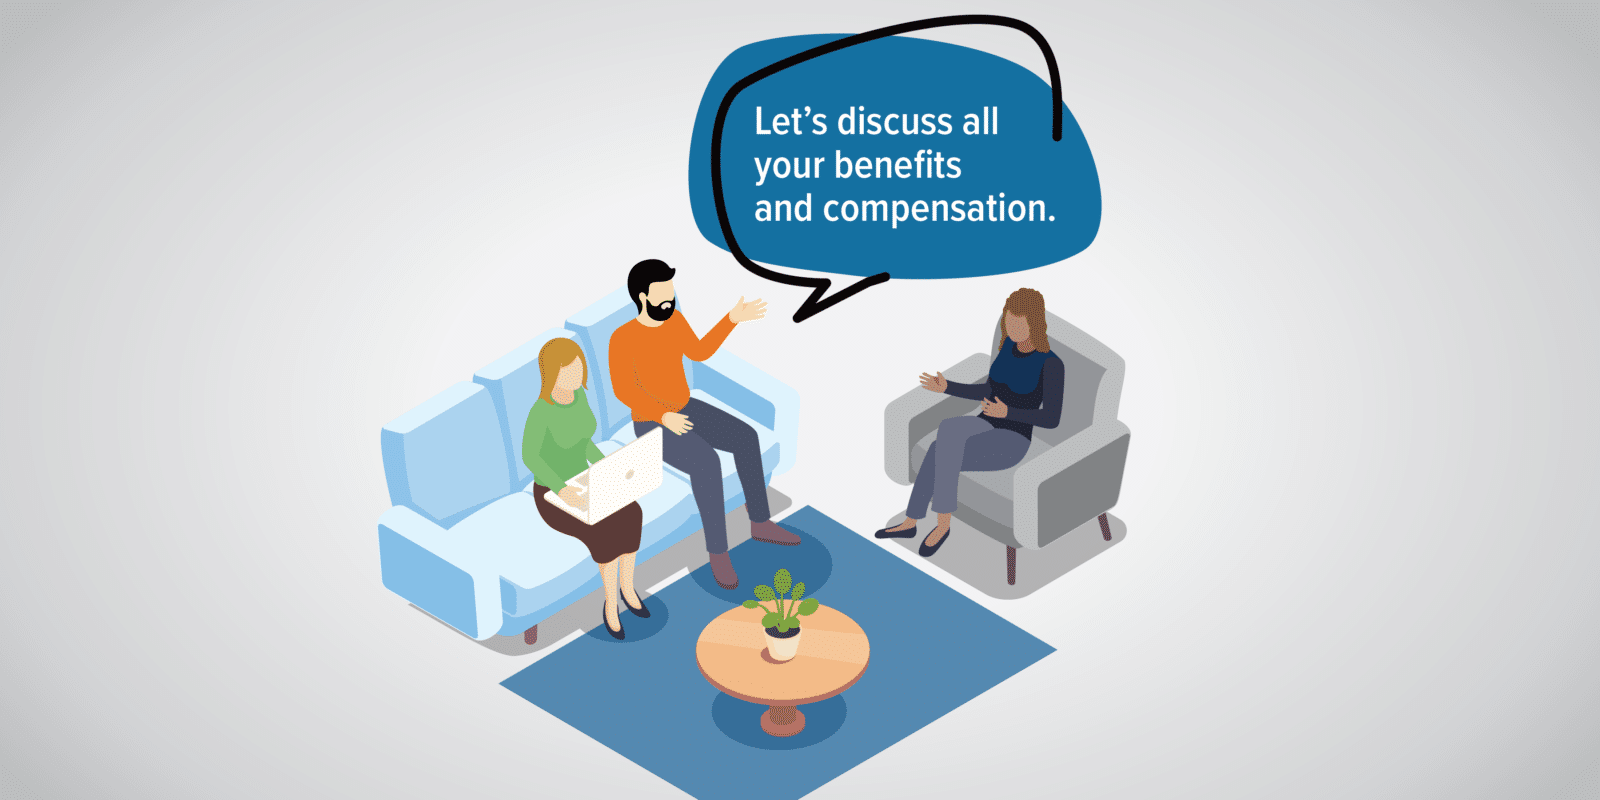 An illustration of three people sitting on couches discussing benefits and compensation.